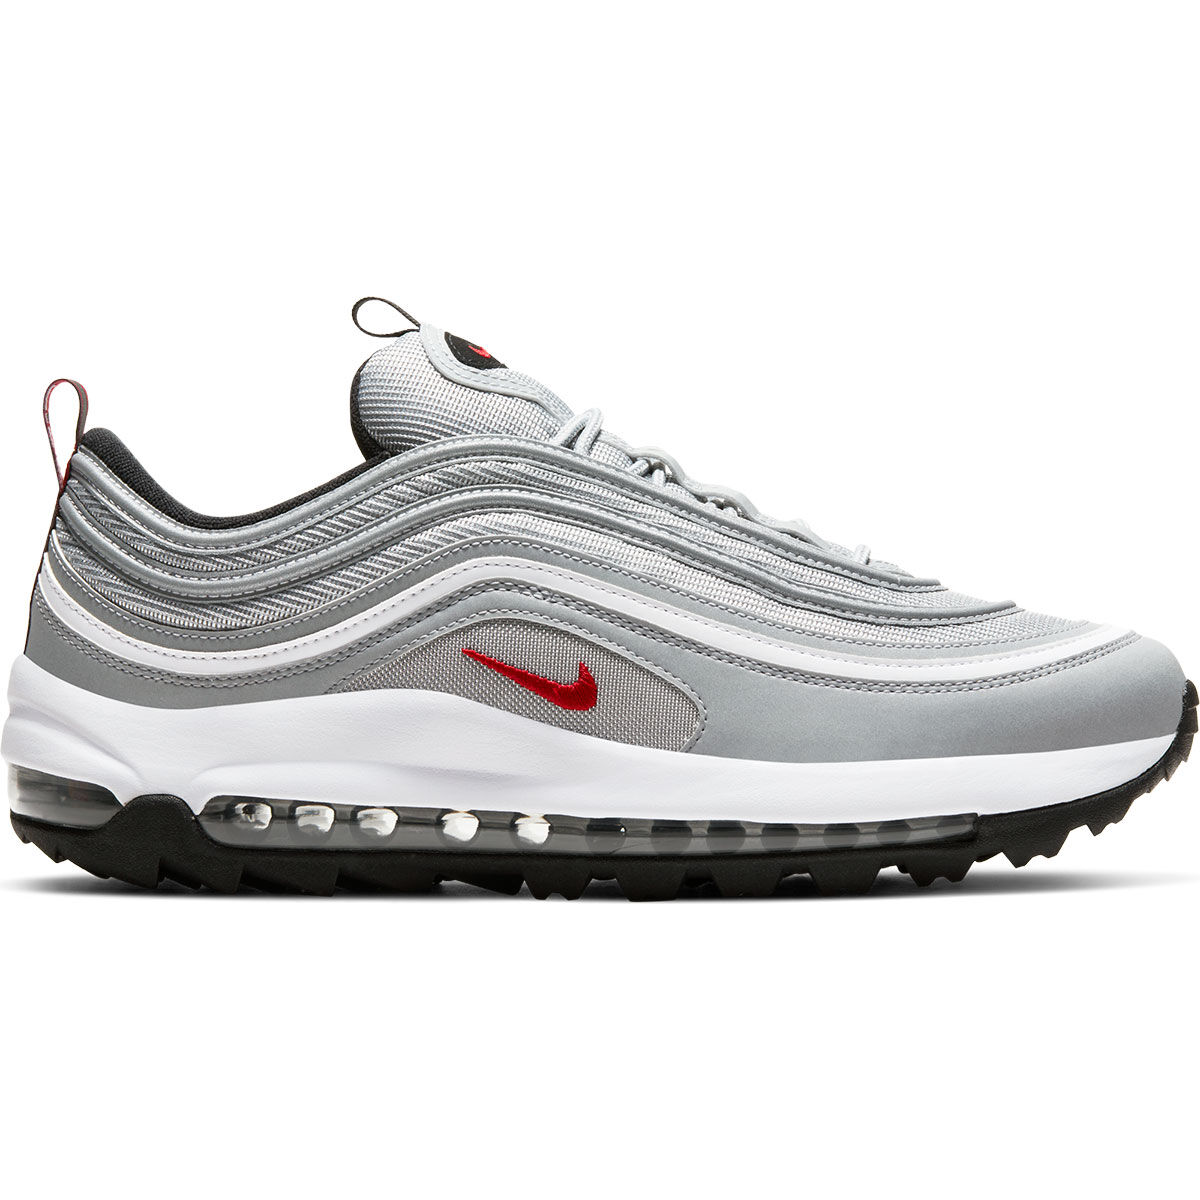 Nike Golf Air Max 97 G Shoes from 